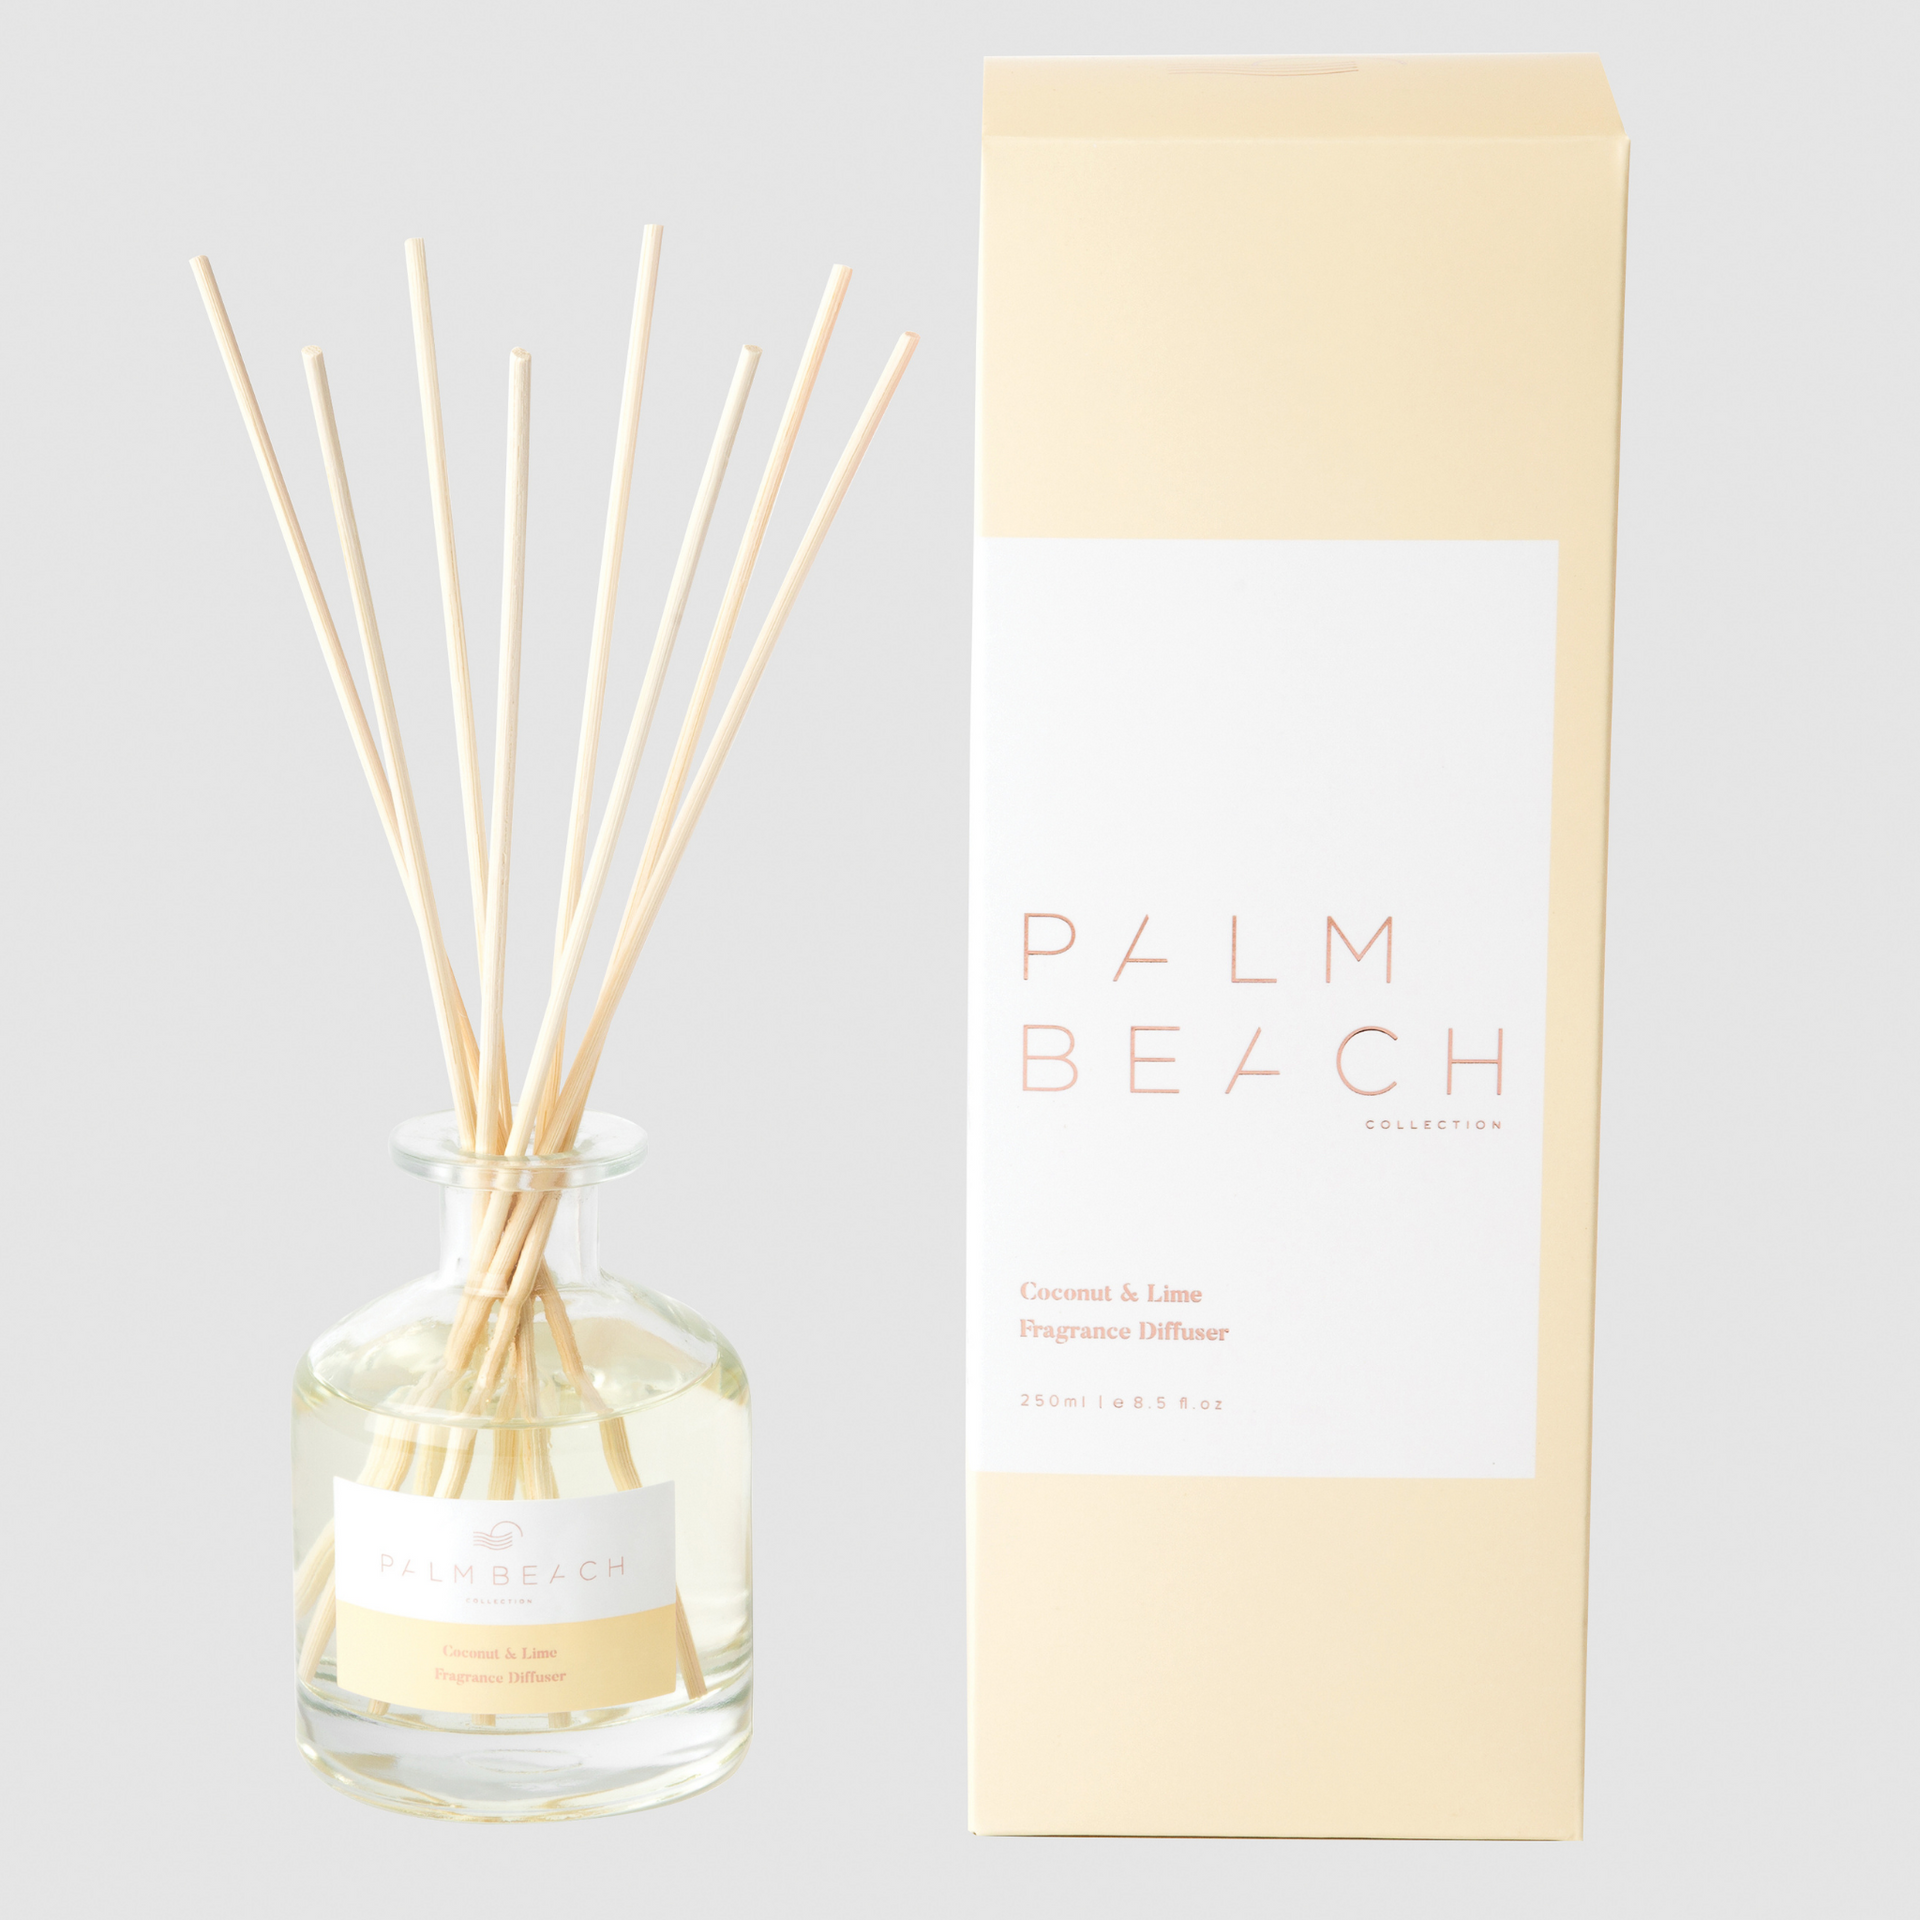 Coconut & Lime <br> 250ml Fragrance Diffuser